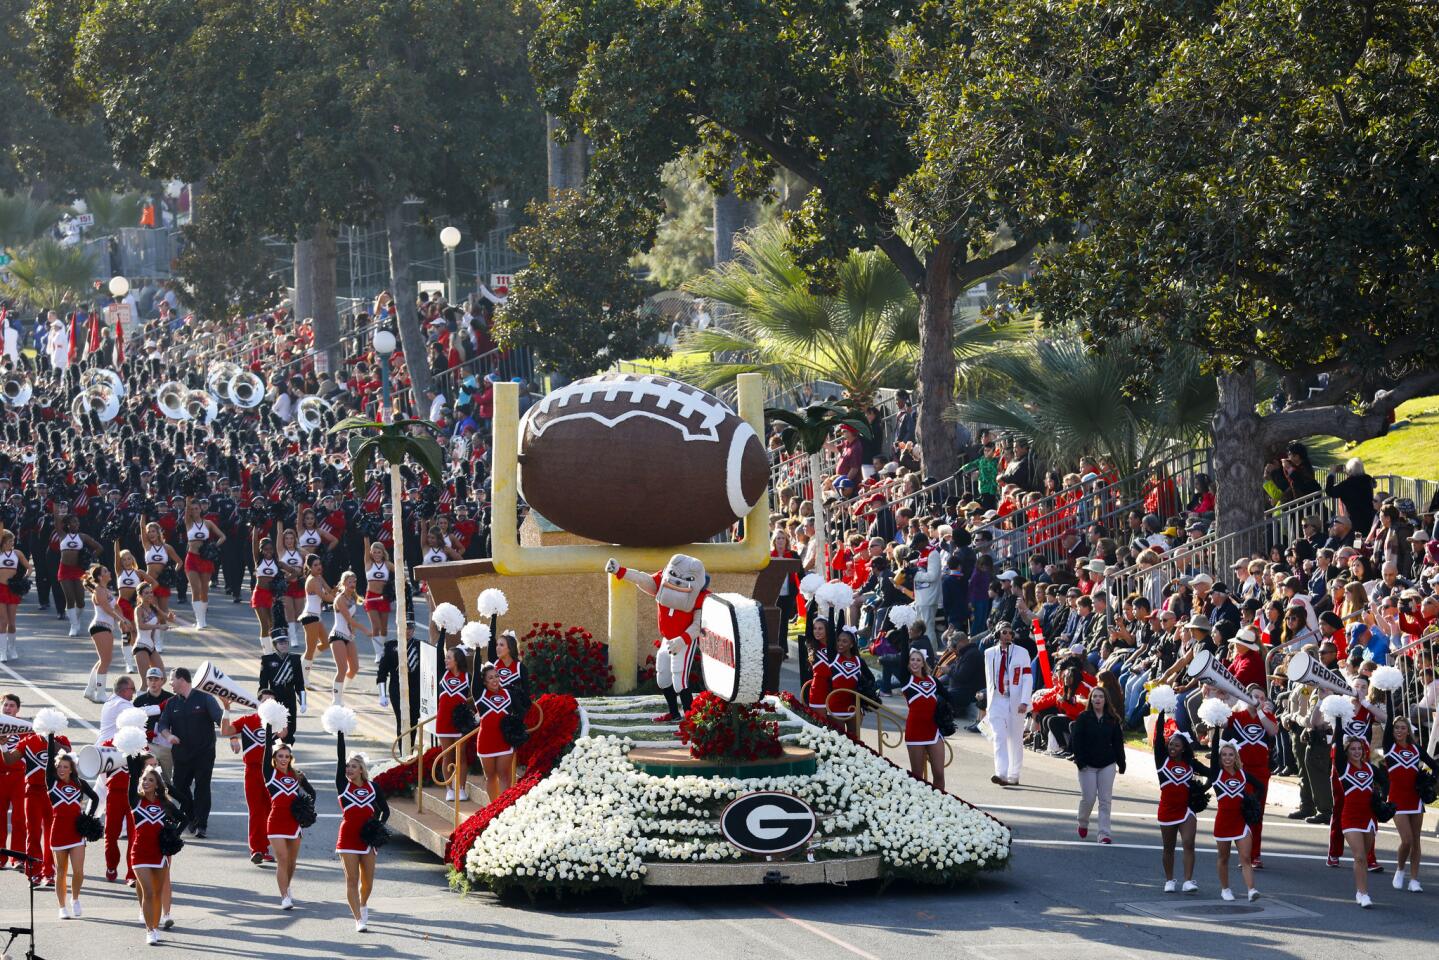 The University of Georgia Bulldogs band marches during the 2017 Rose Parade on Monday, January 1, 2018 in Pasadena, Calif. (Patrick T. Fallon/ For The Los Angeles Times)